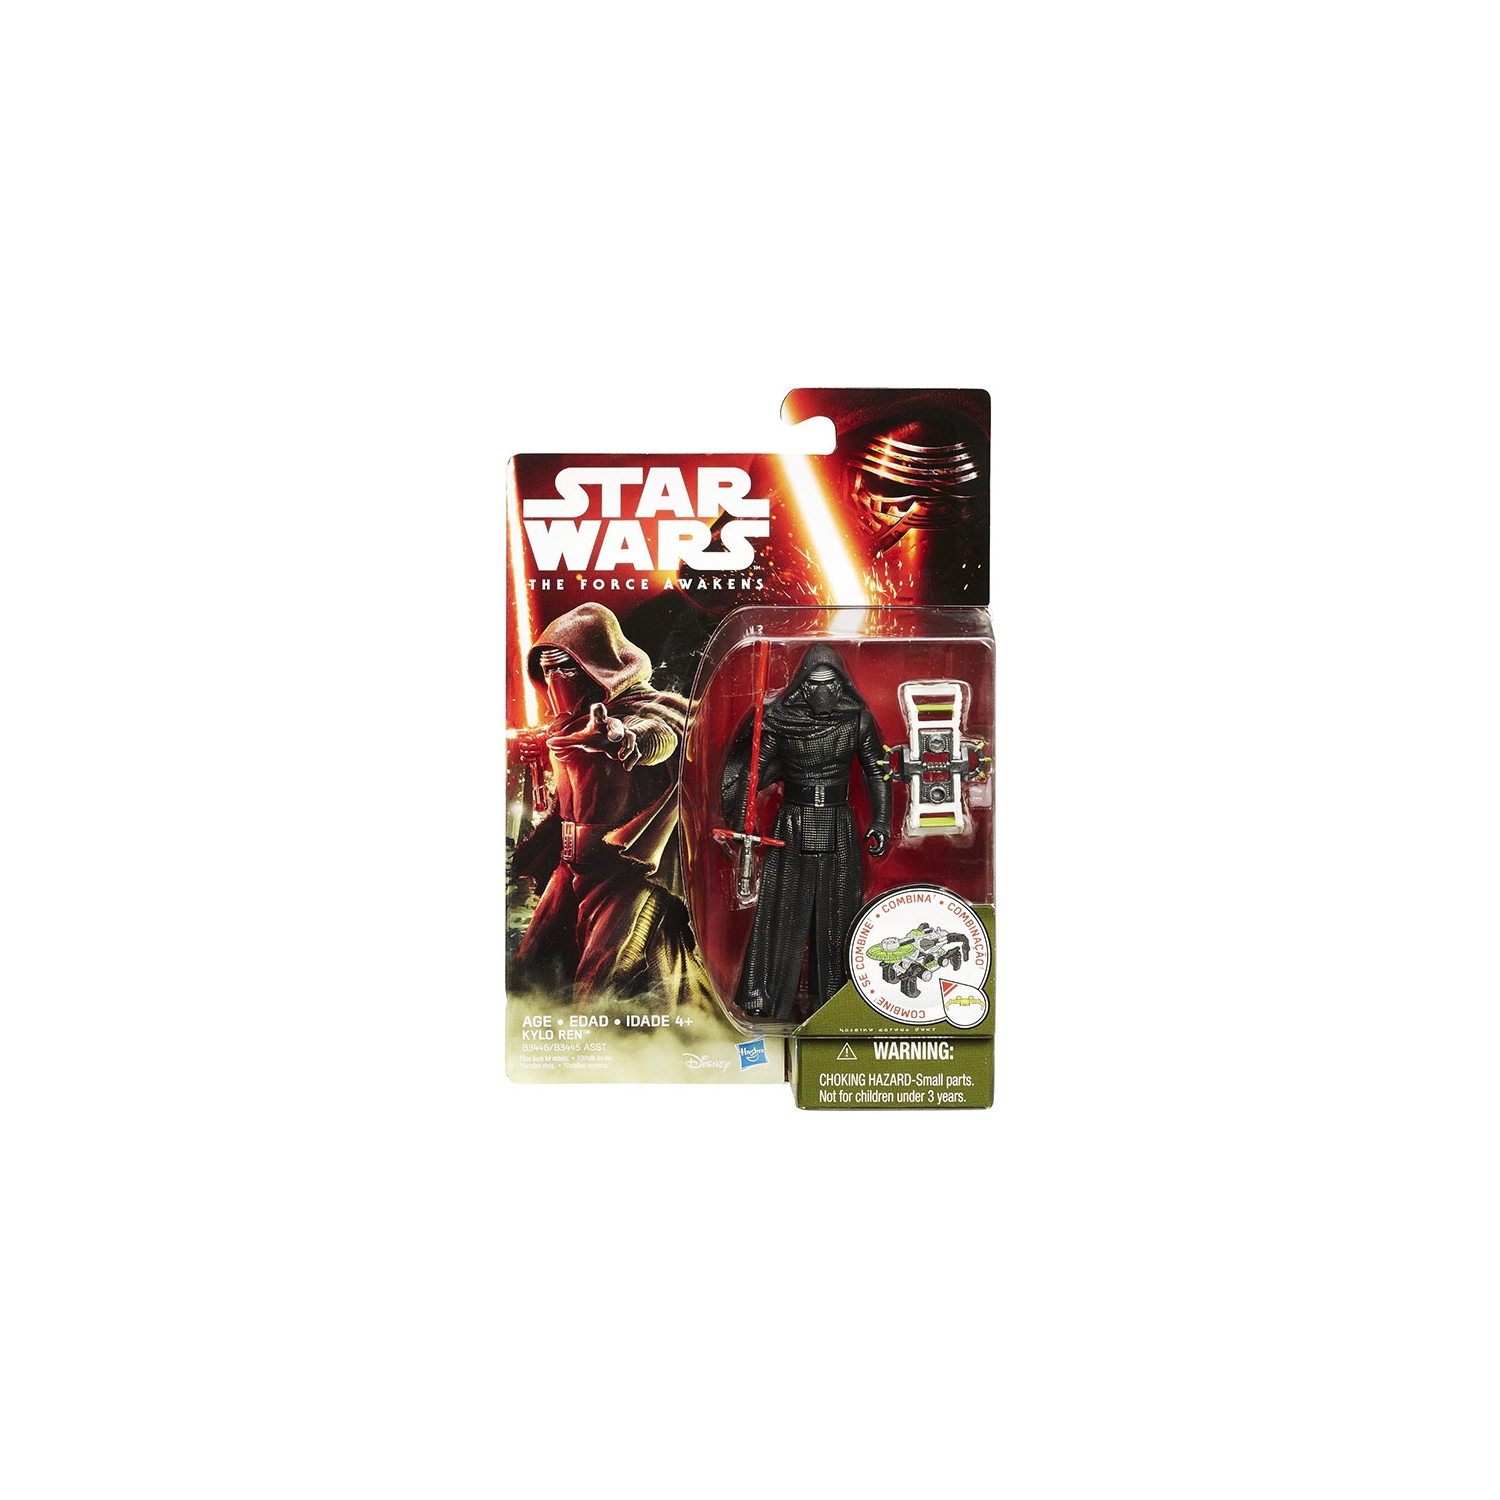 Star Wars The Force Awakens 3.75 Inch Action Figure Jungle And Space Wave 1 - Kylo Ren Masked